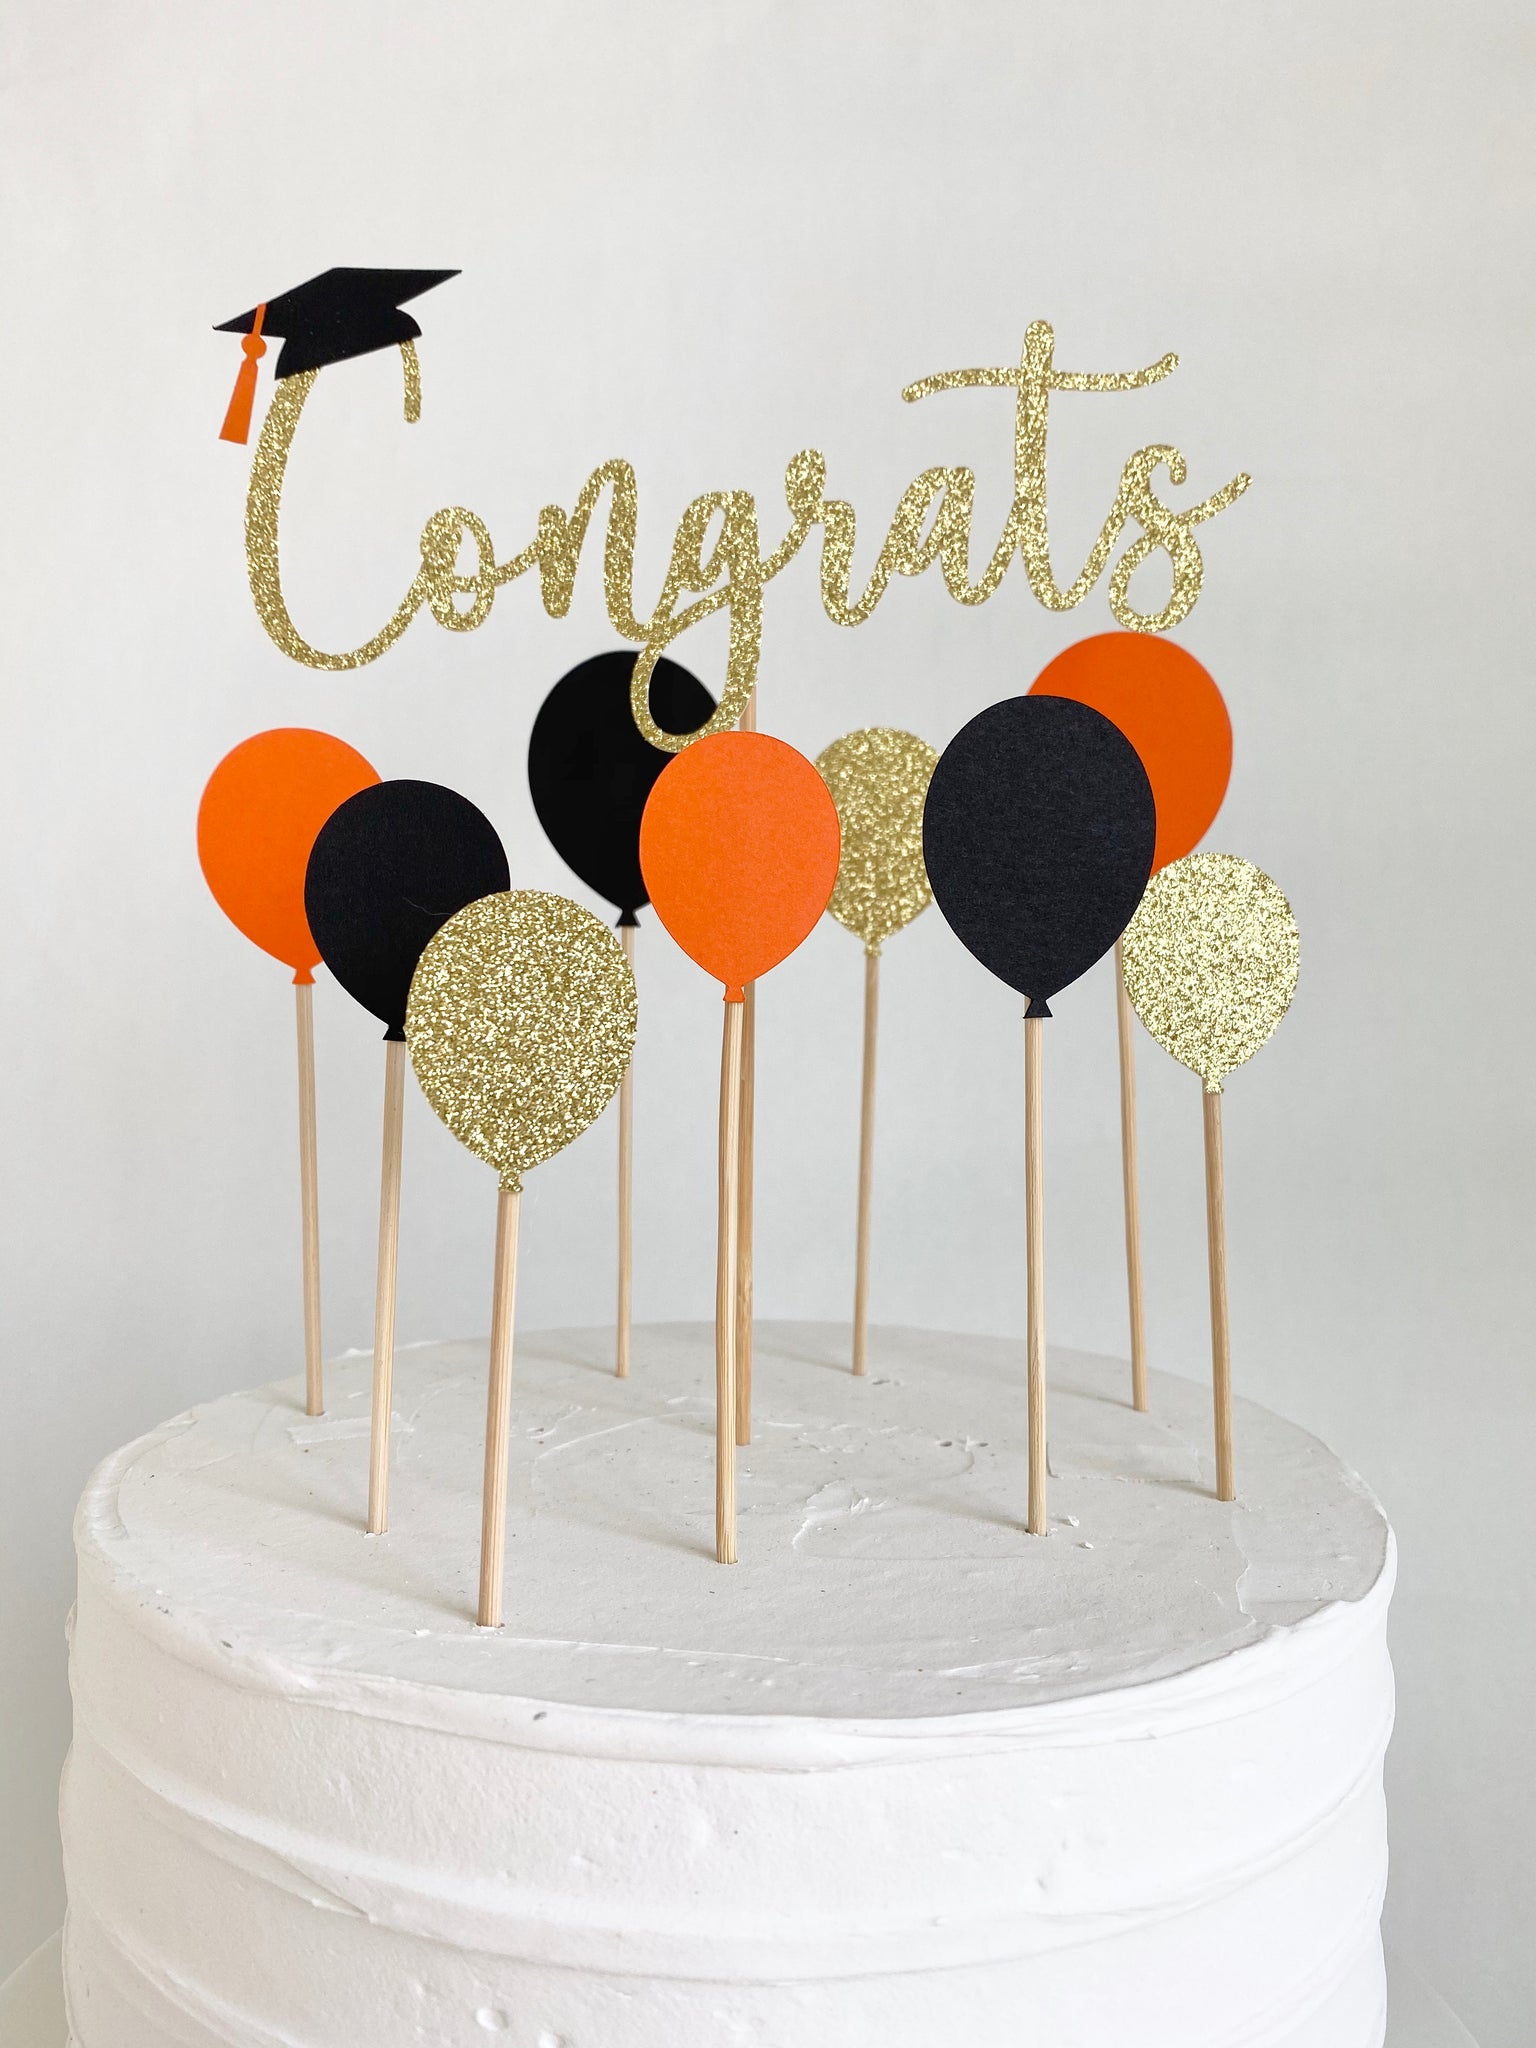 Celebrate Graduation in Style: Top Cake Toppers for a Sweet插图3